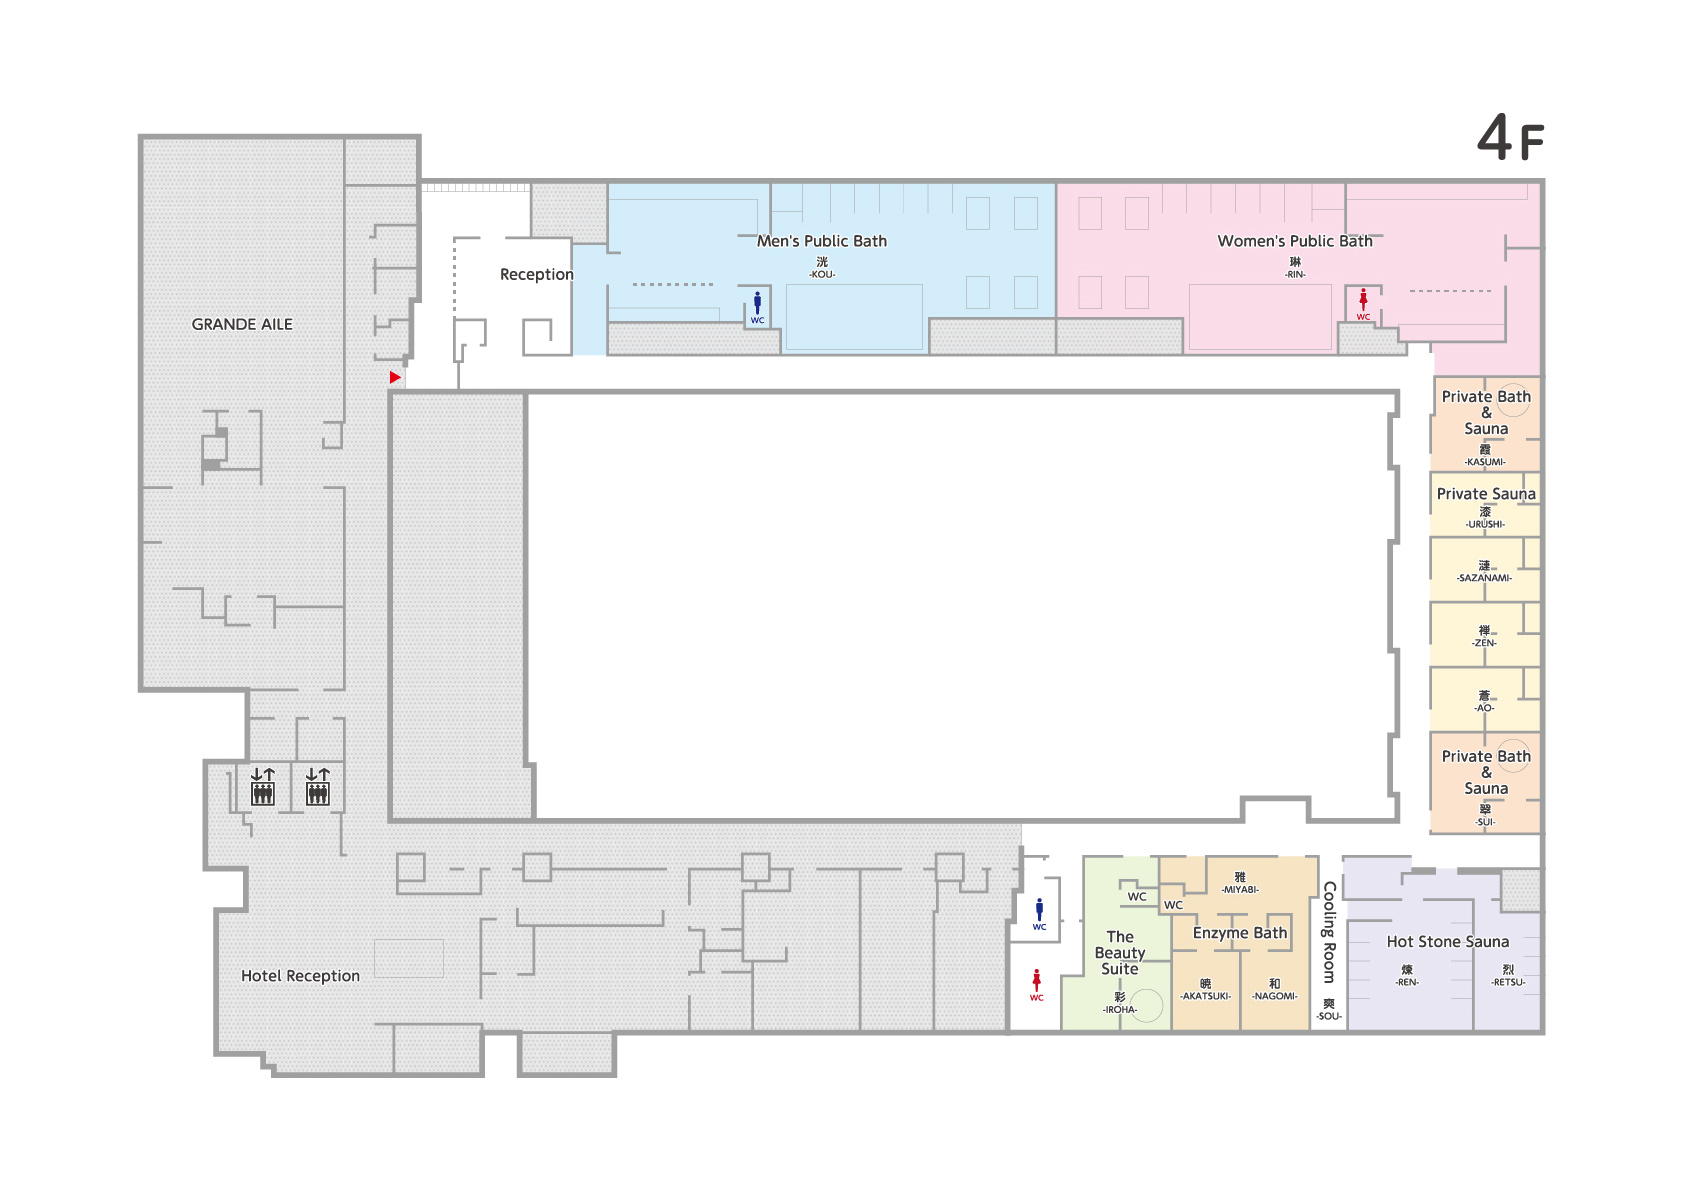 Guide map of the building